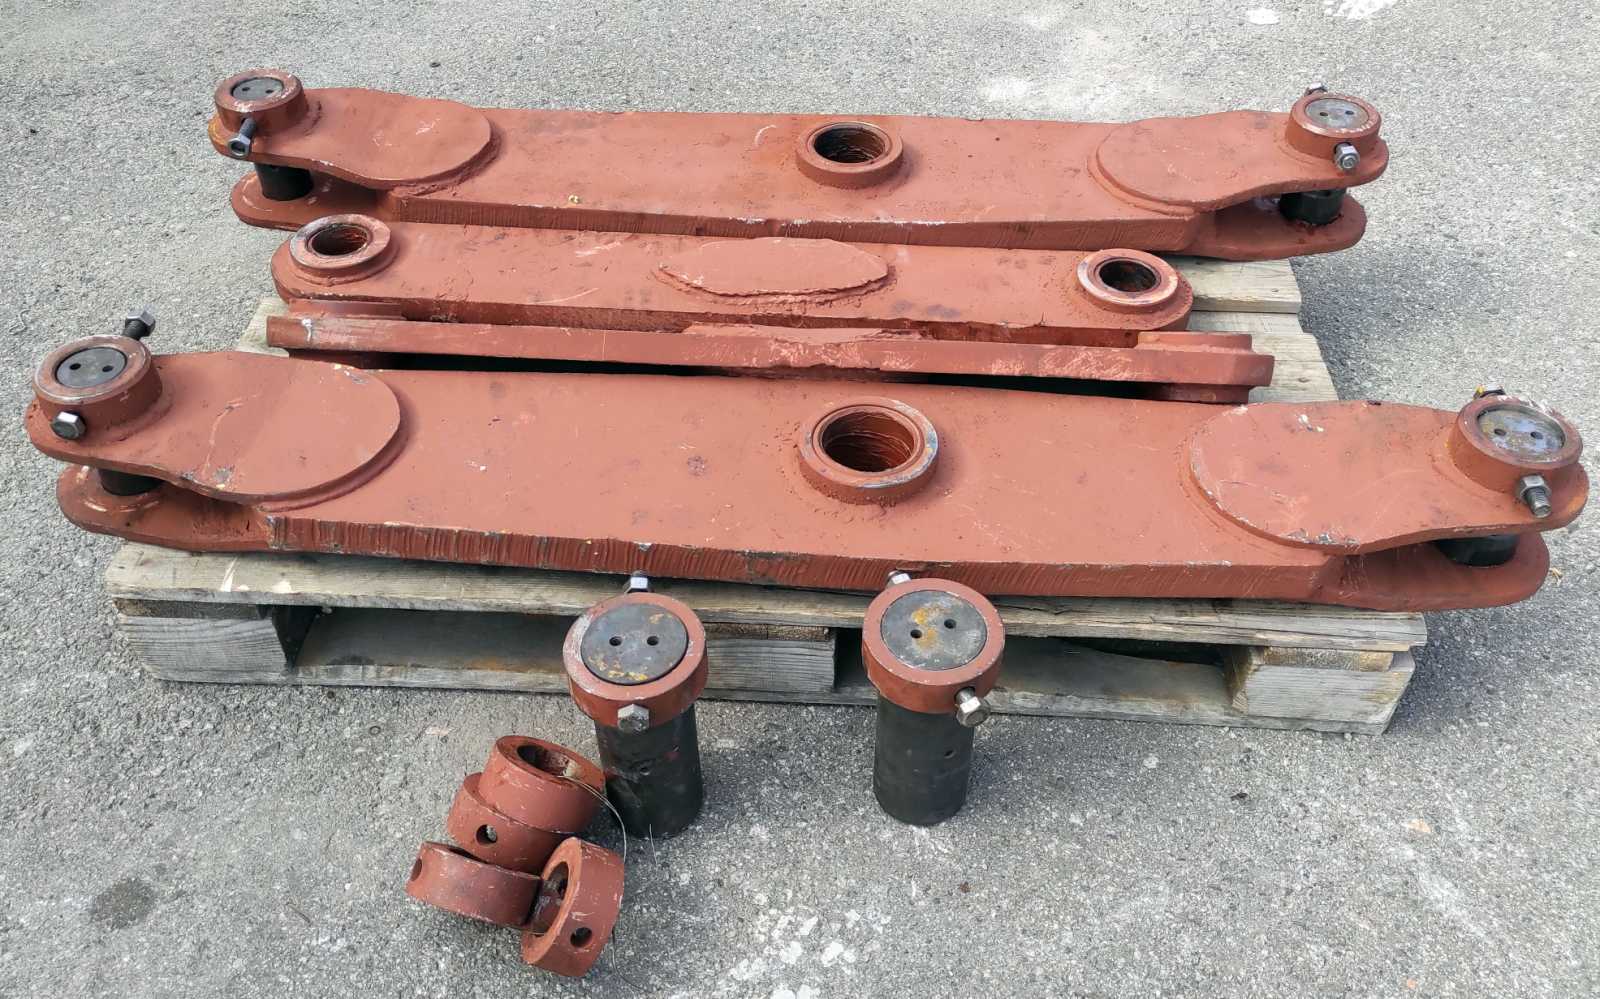 Repair of the rocker arms of the T-156 loader (restoration of the bushing seats)